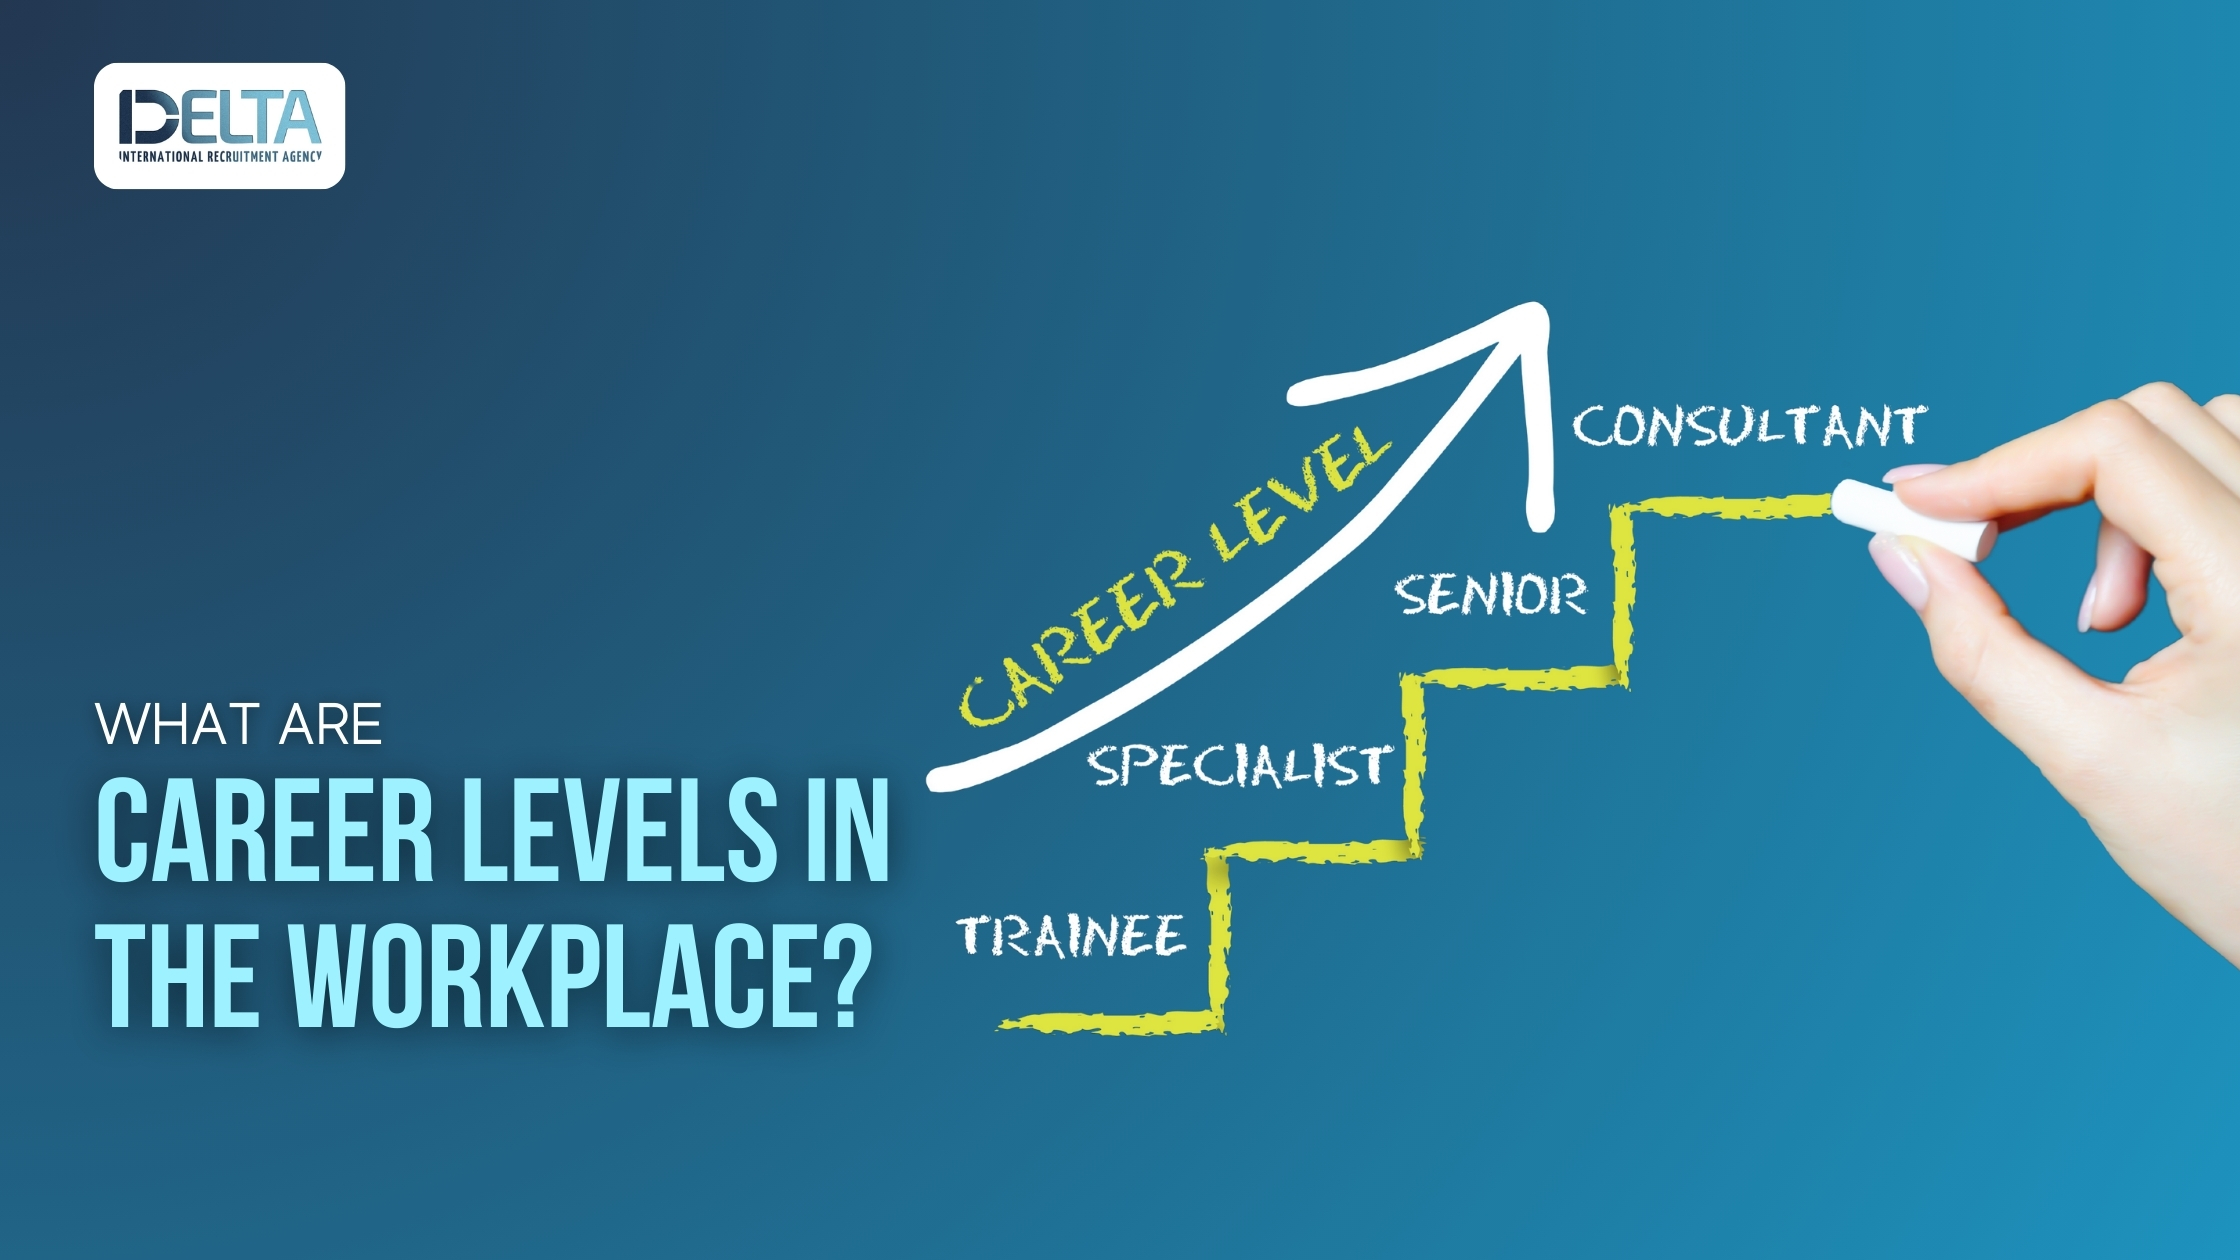 What are Career Levels in the Workplace? Should You Implement Them?